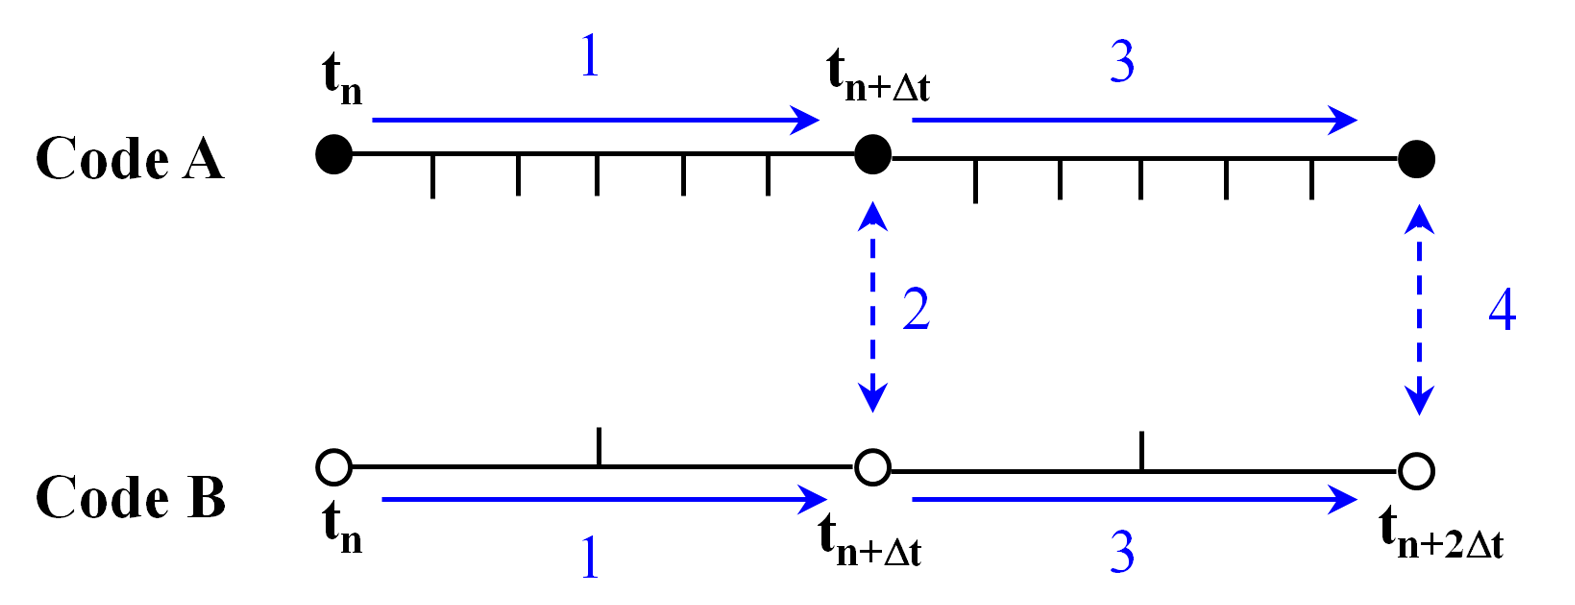 Jacobi coupling scheme is also known as parallel algorithm where both analysis codes run concurrently.